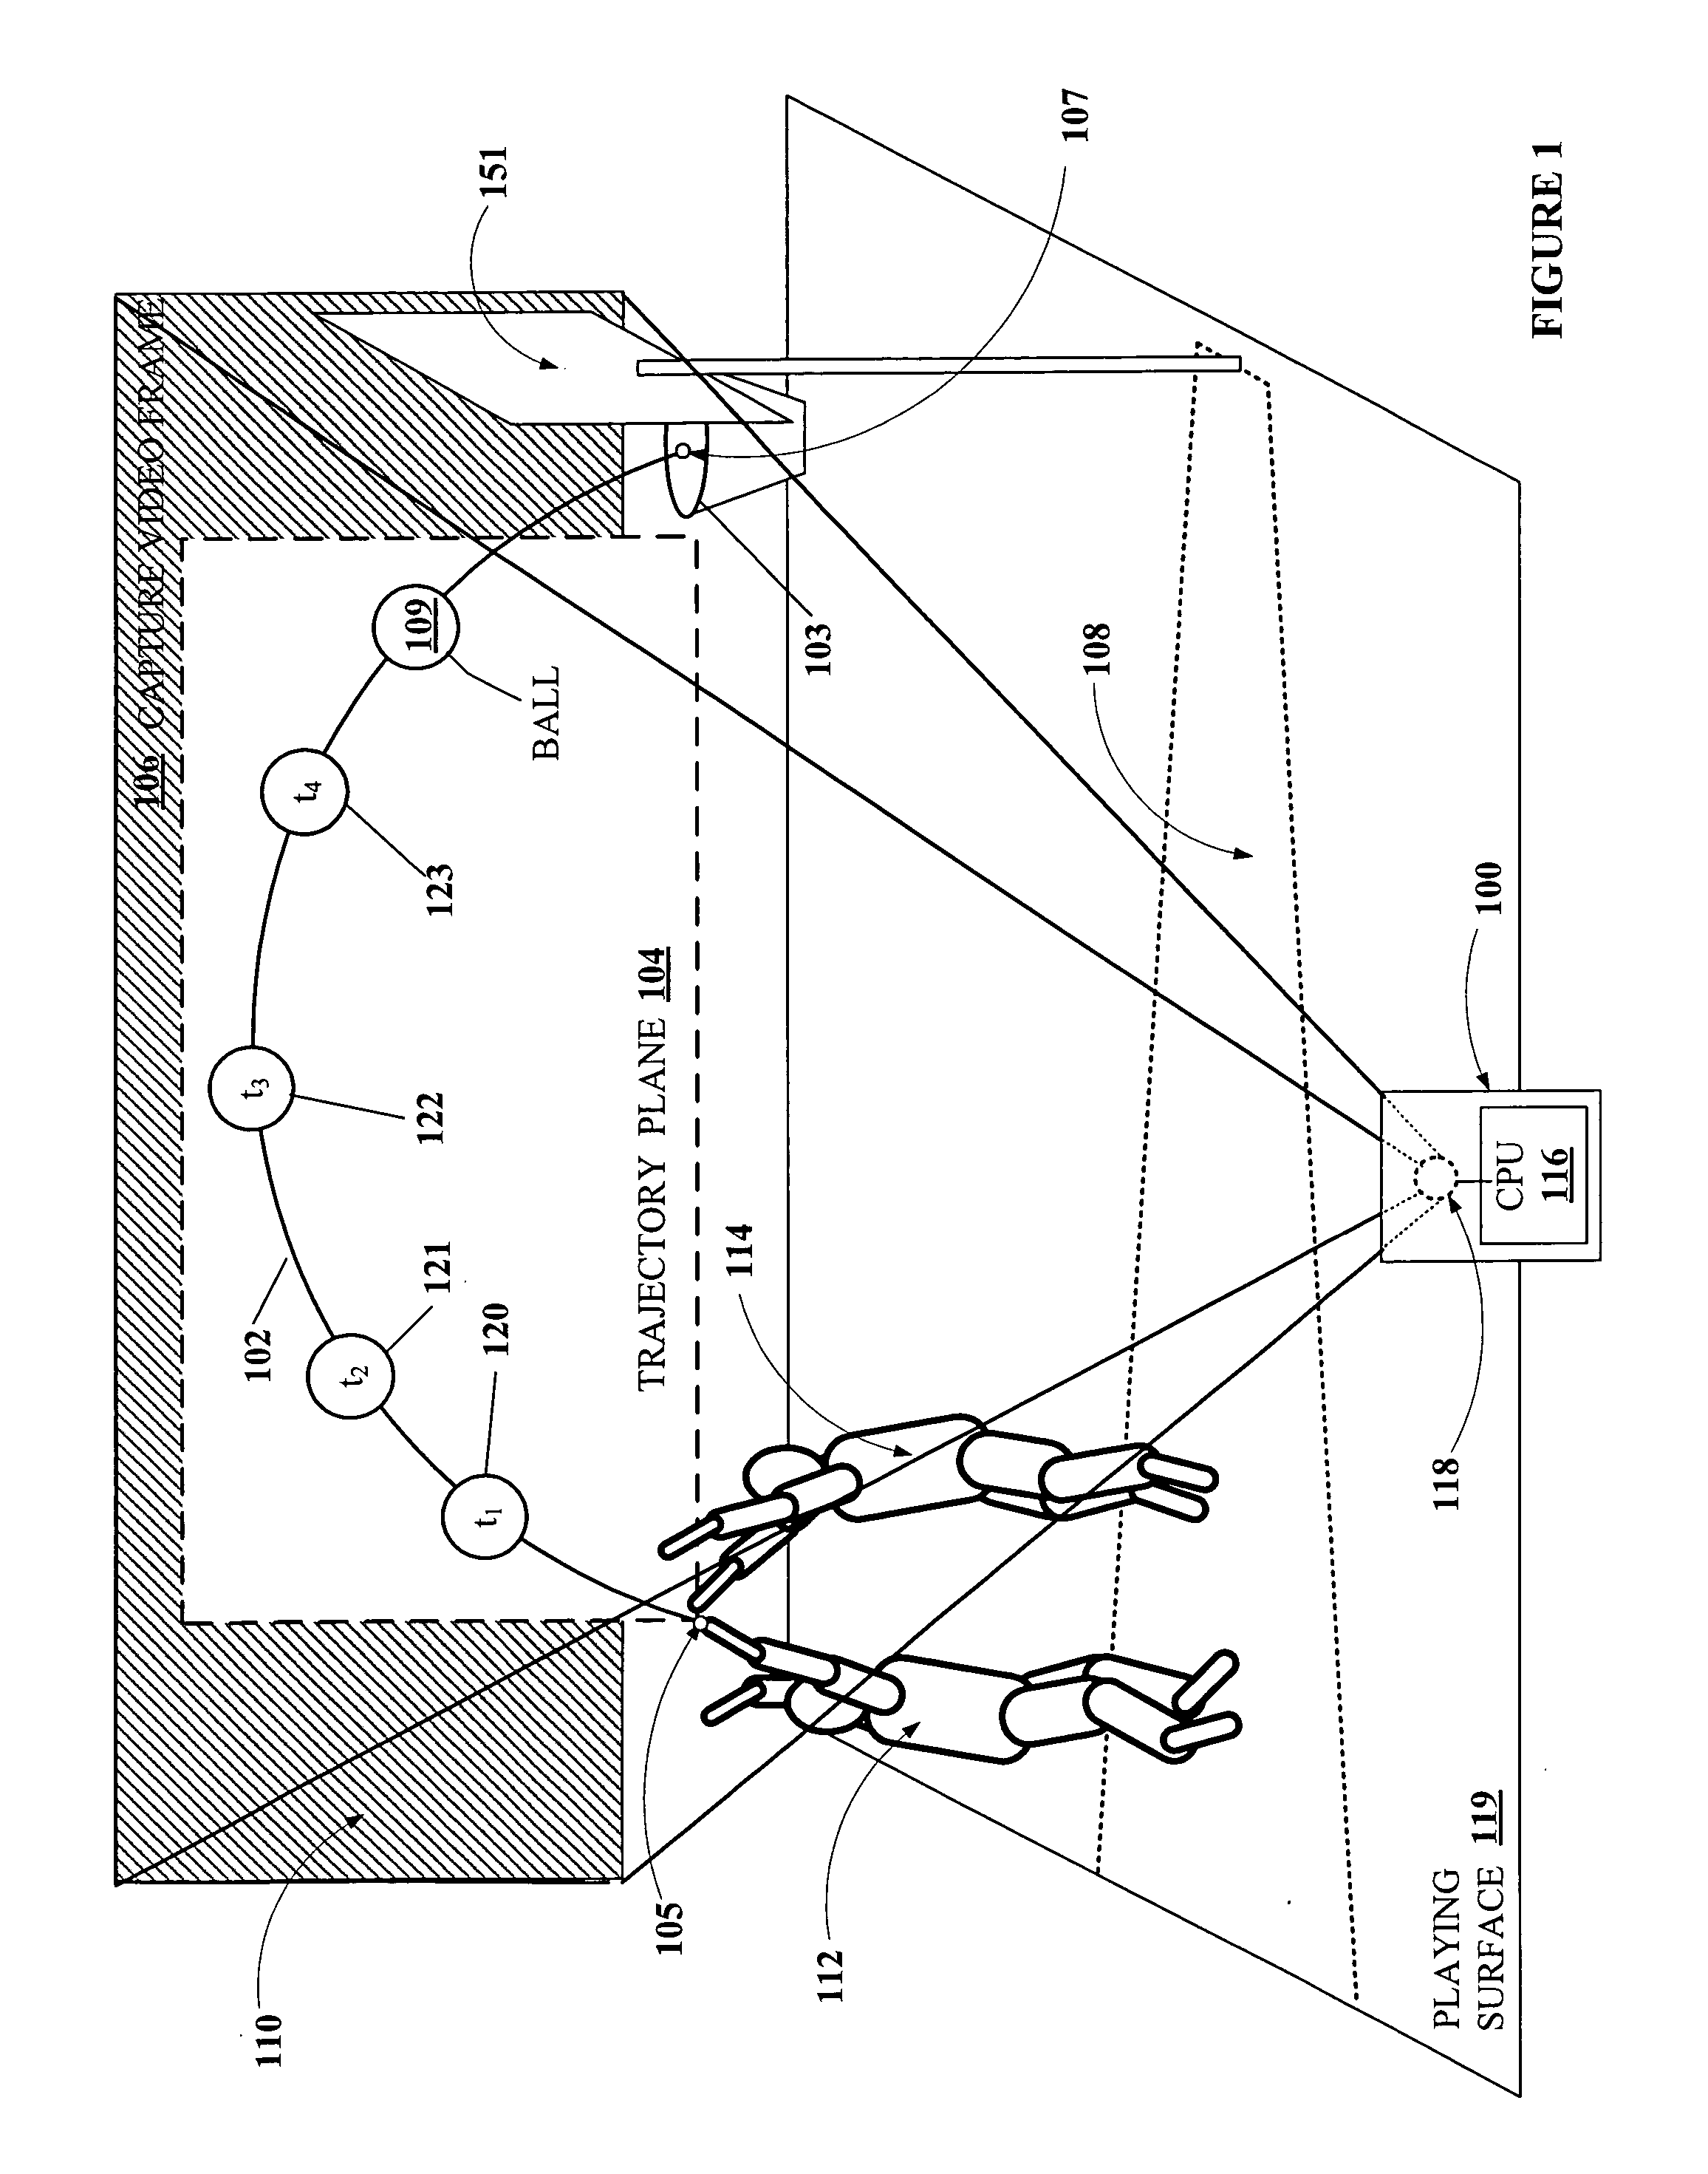 Trajectory detection and feedback system